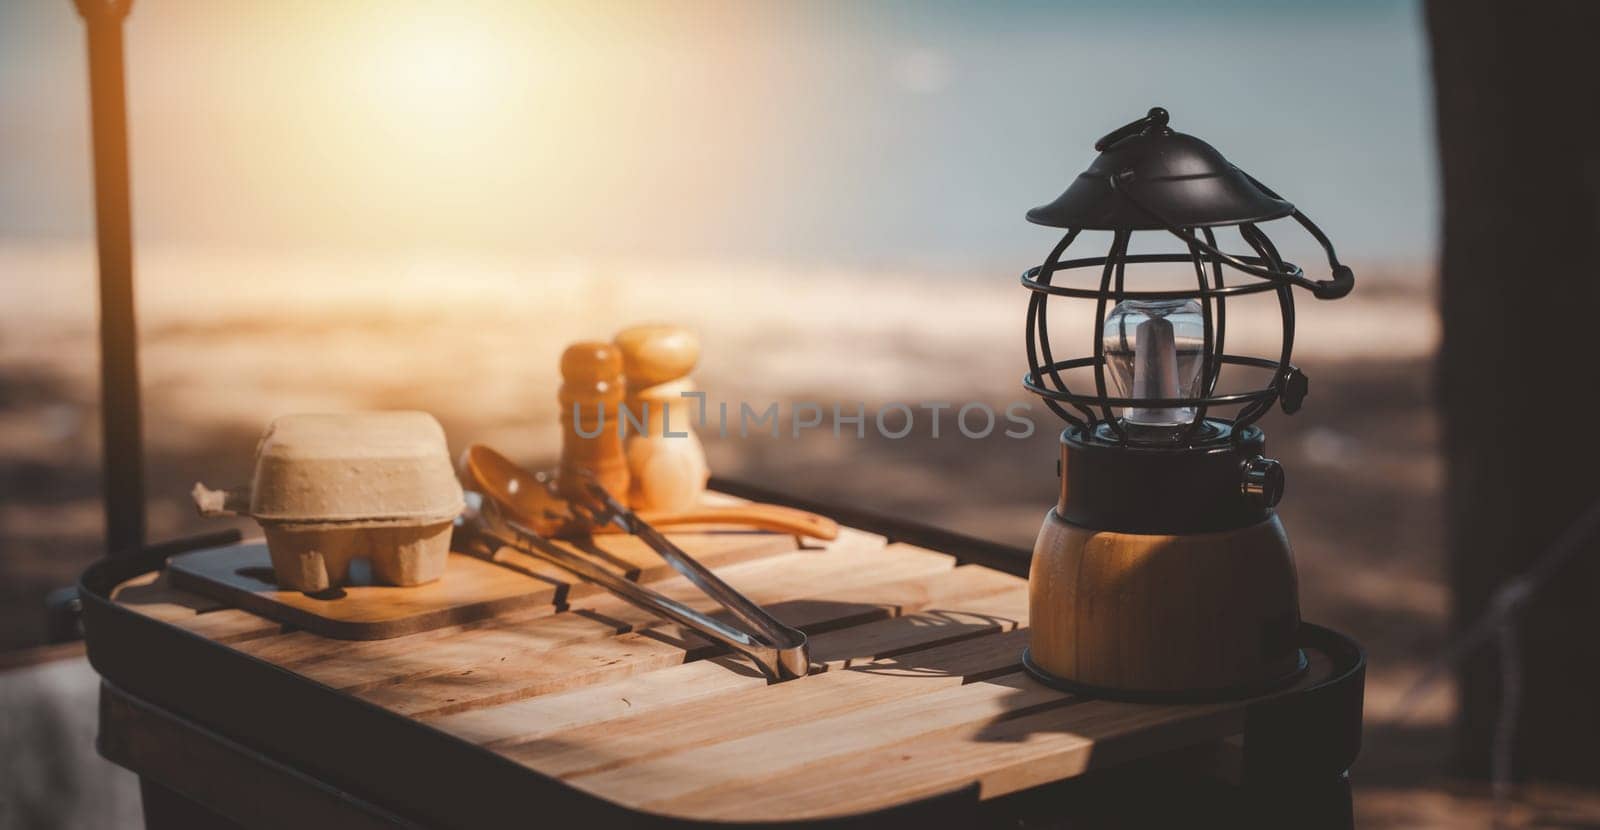 Old meets new on the campsite, A vintage kerosene lamp and a modern LED lantern on a wooden table. The perfect summer setup for camping and picnics. Illuminate your environment.